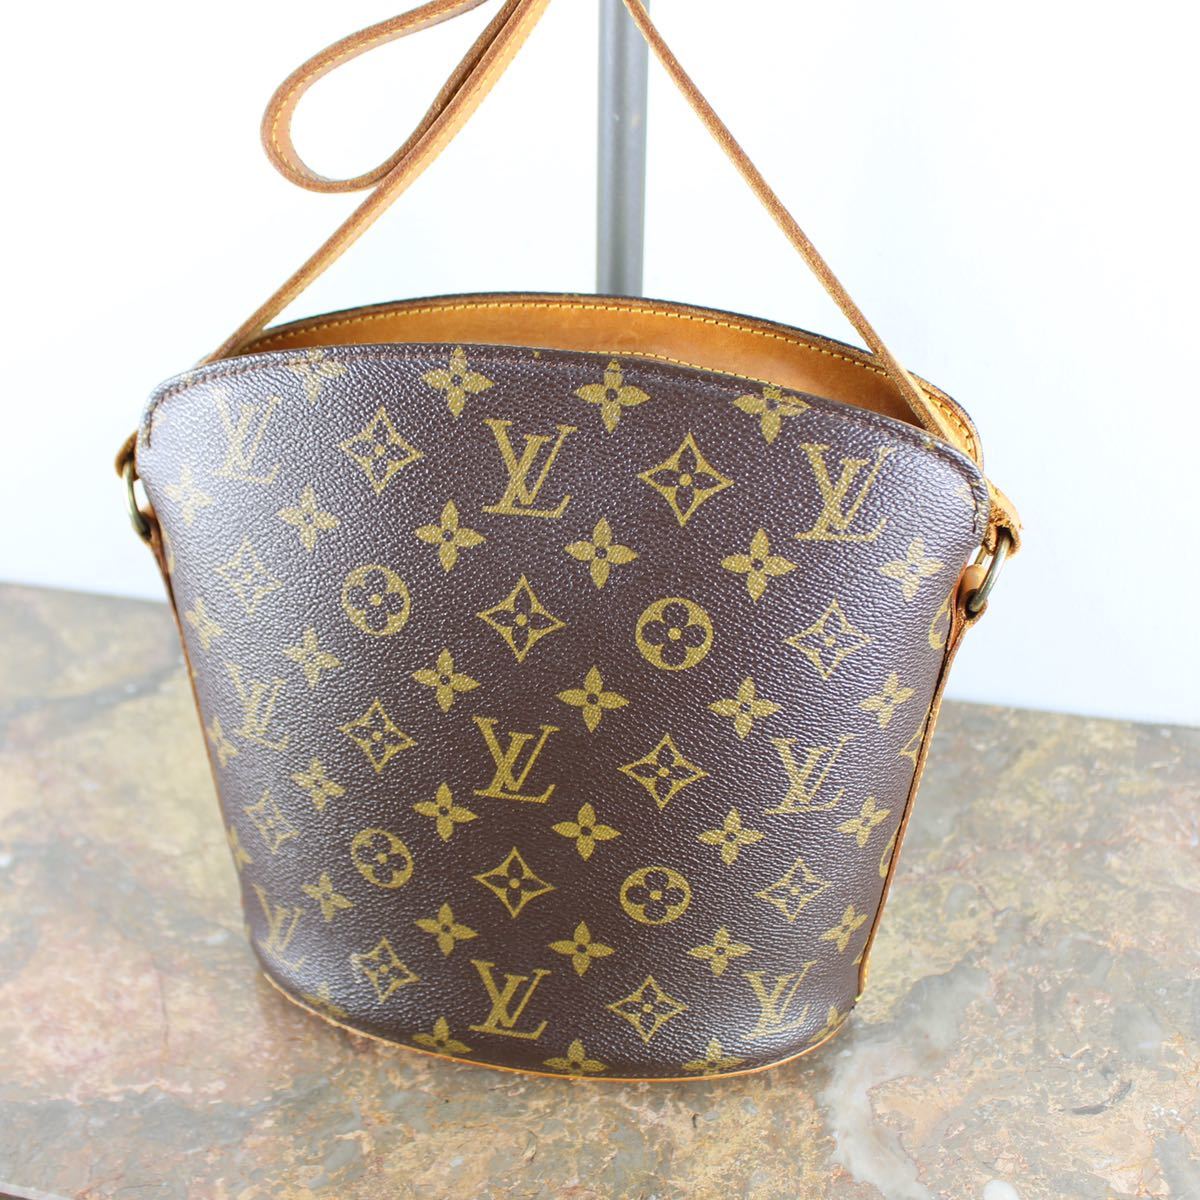 LOUIS VUITTON M51290 SD0051 MONOGRAM PATTERNED SHOULDER BAG MADE IN  USA/ルイヴィトンドルーオモノグラム柄ショルダーバッグ